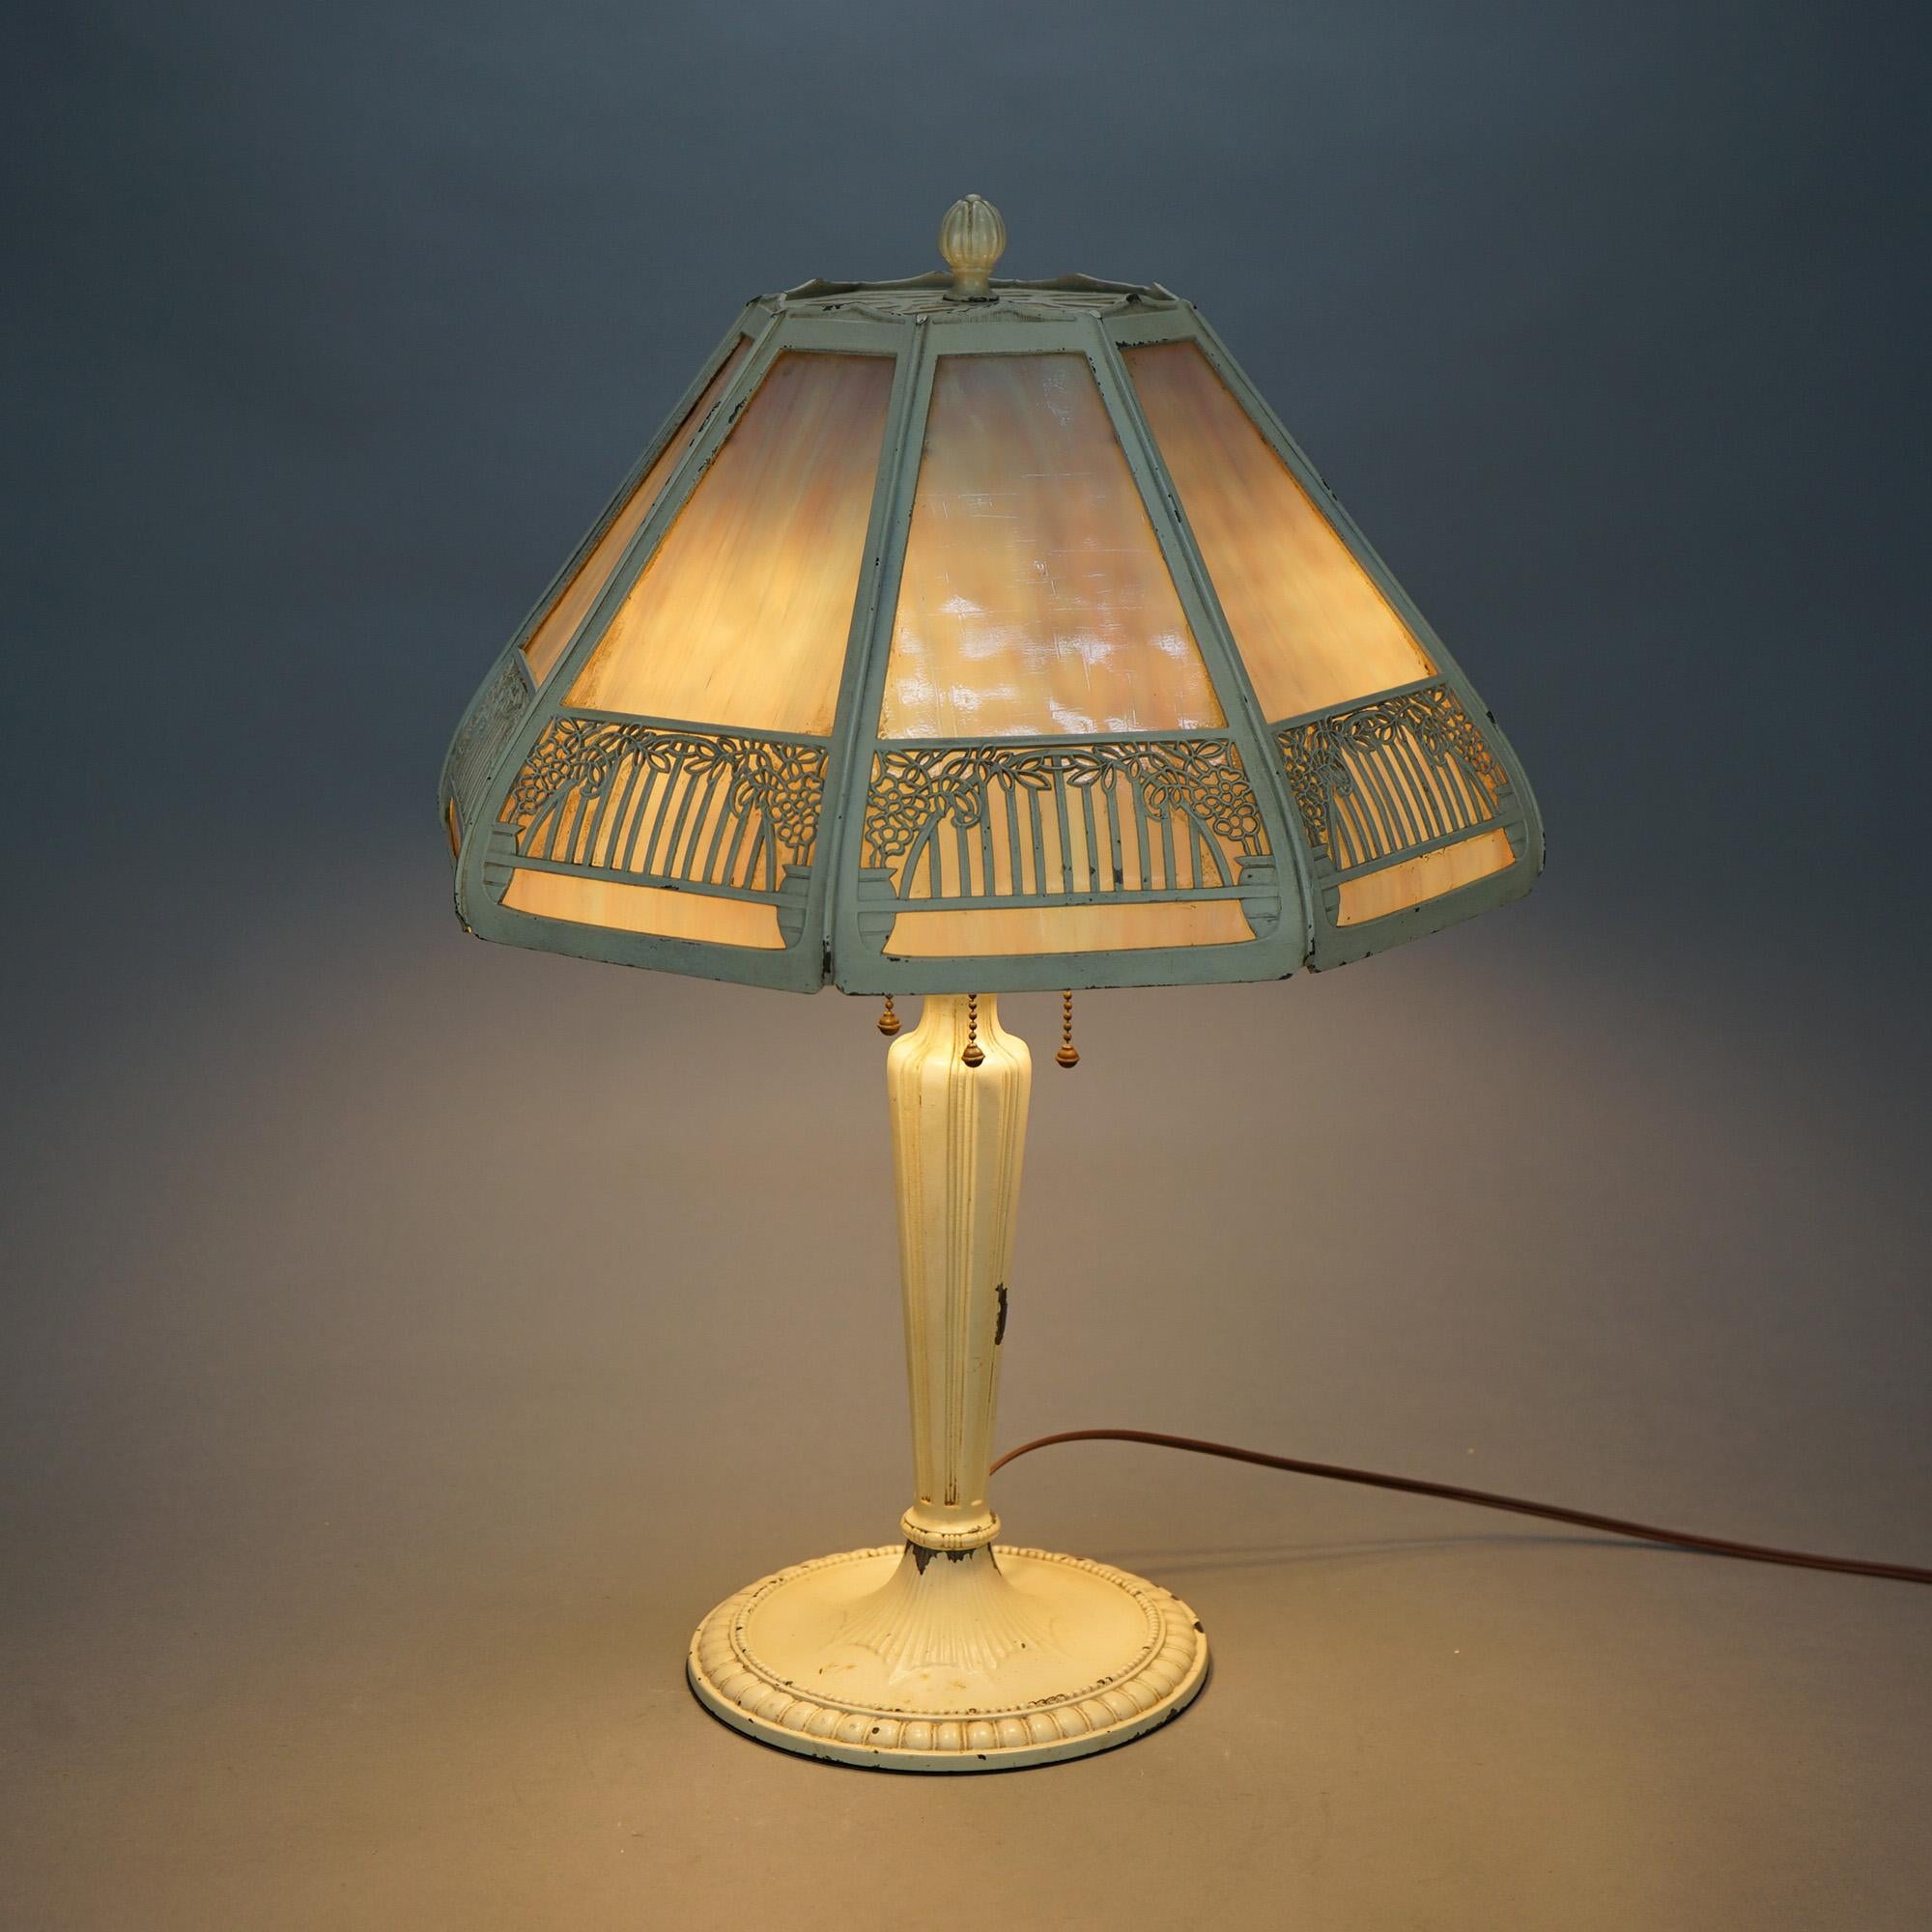 American Antique Arts & Crafts Slag Glass Table Lamp with Filigree Panel Shade, C 1920